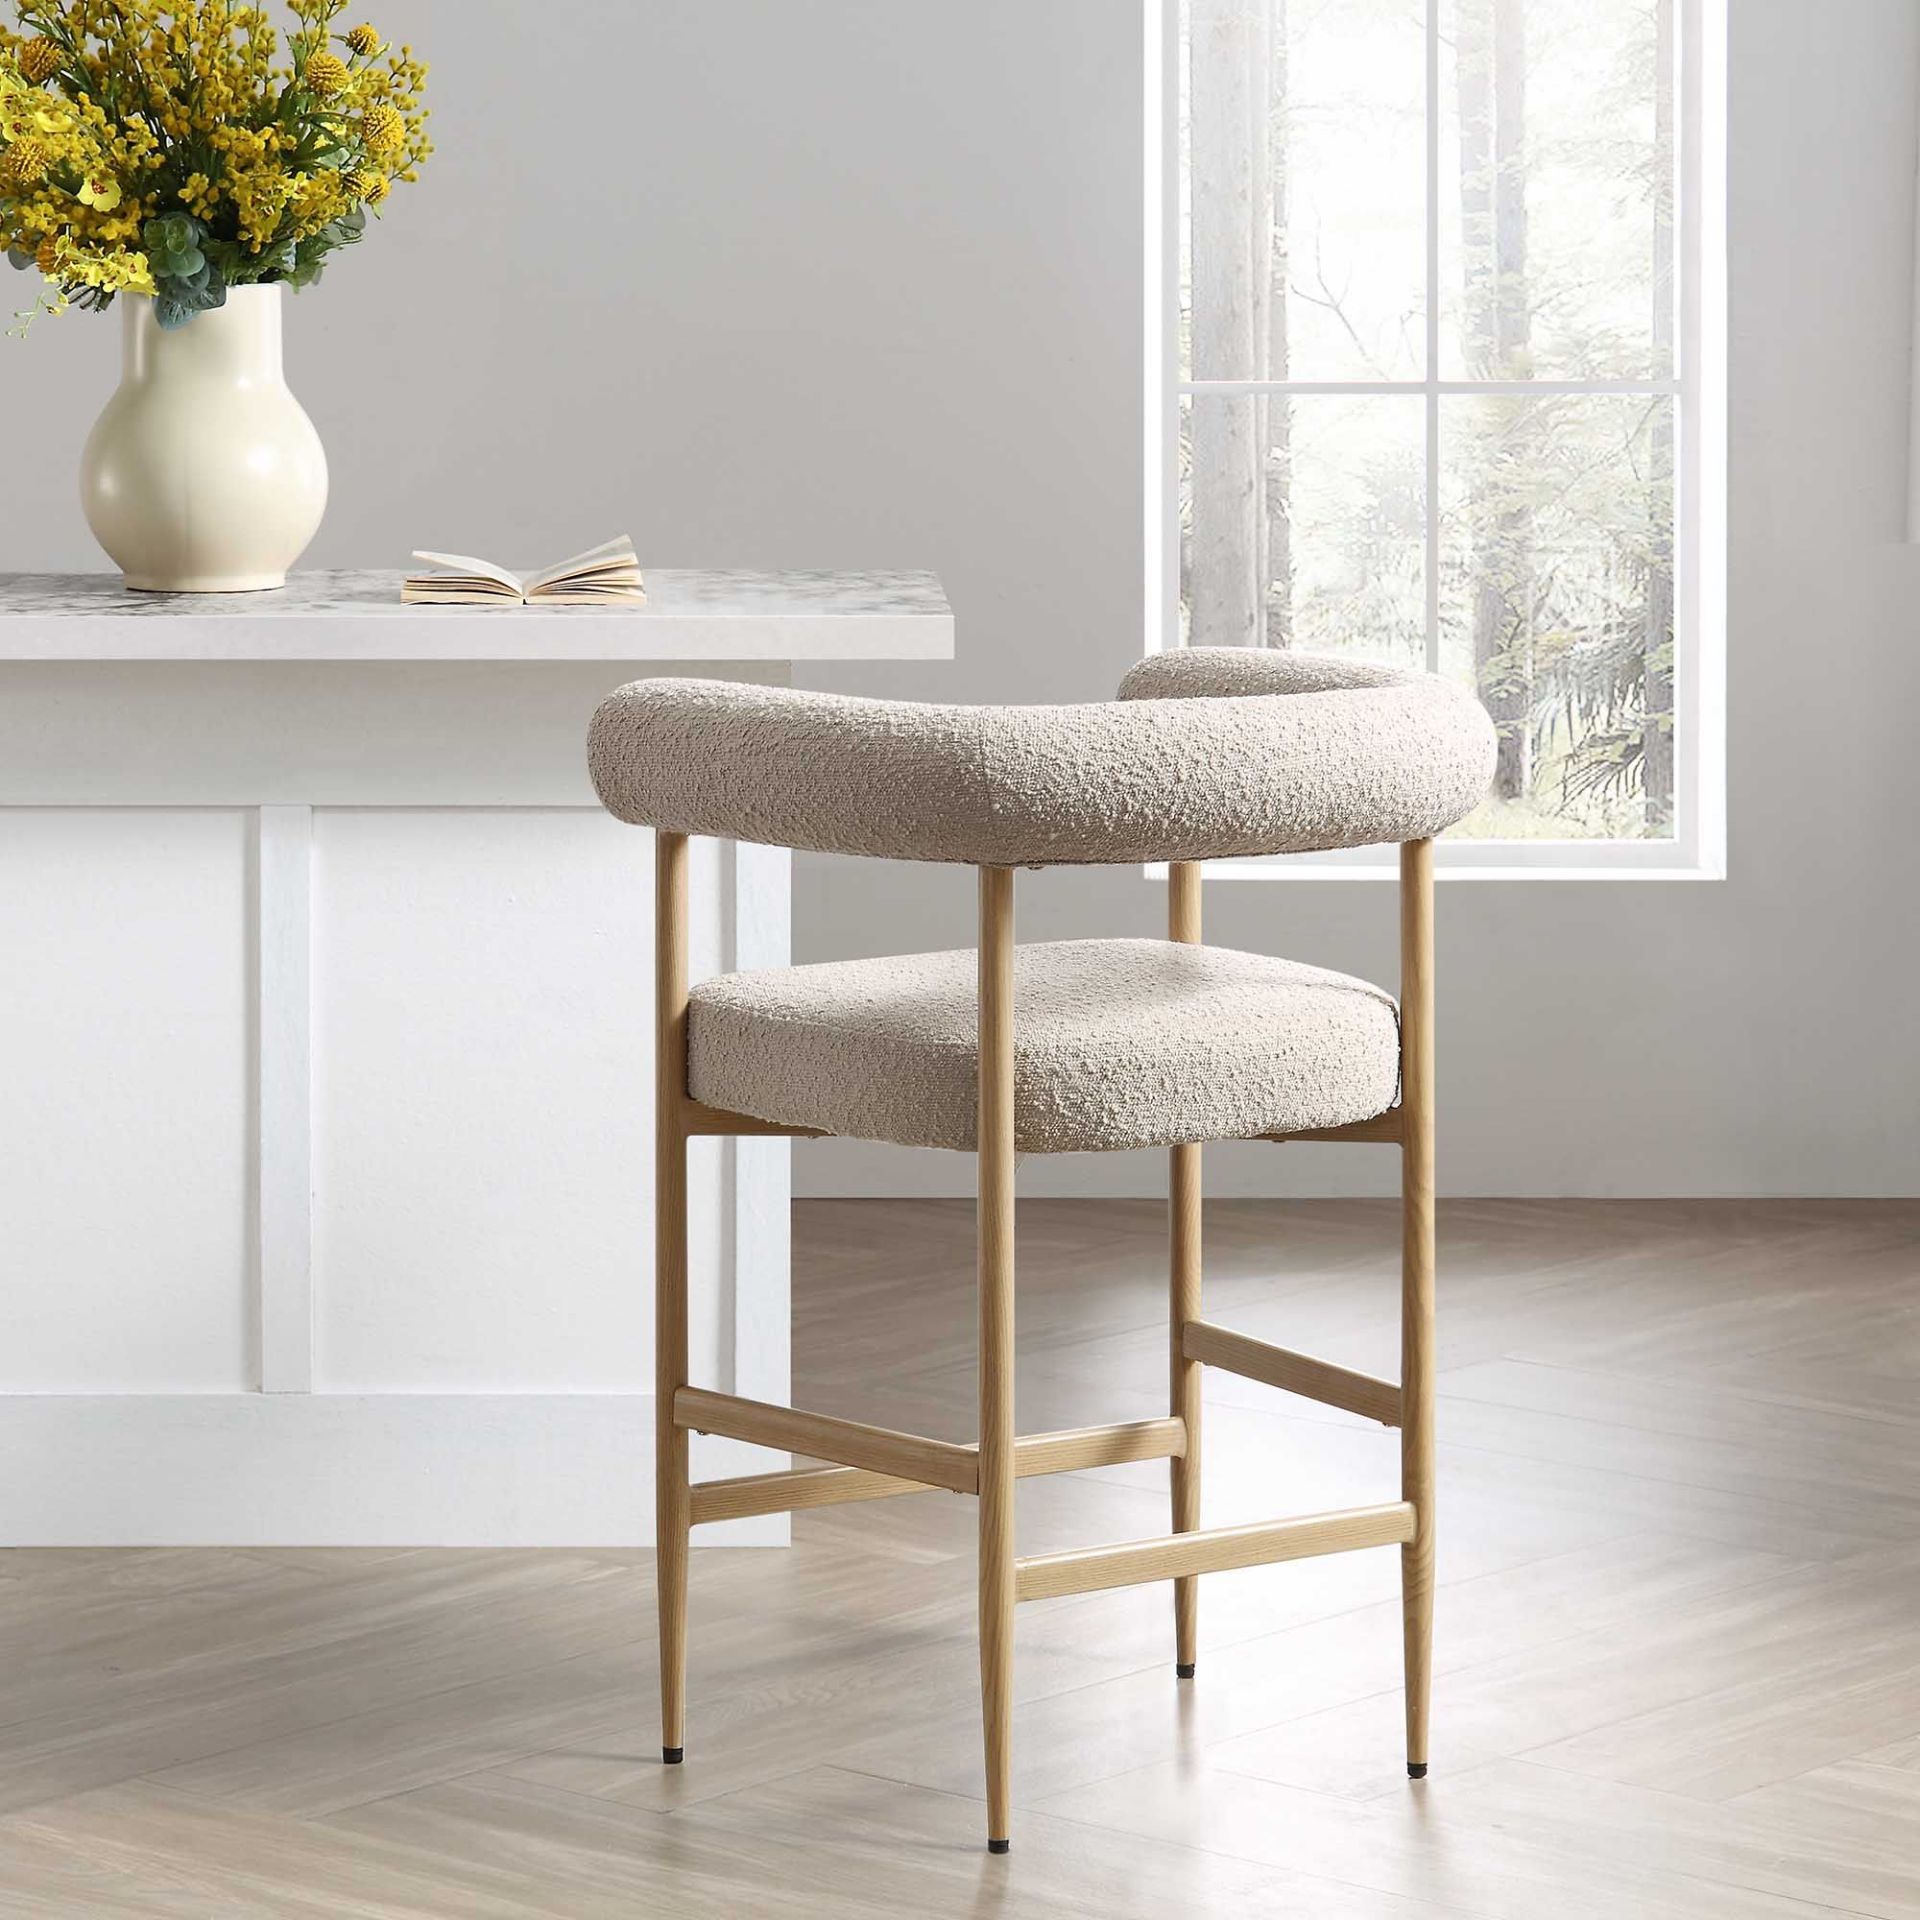 Fulbourn Taupe Boucle Counter Stool with Natural Wood Effect Legs. - ER31. RRP £219.99. A cheerful - Image 2 of 2